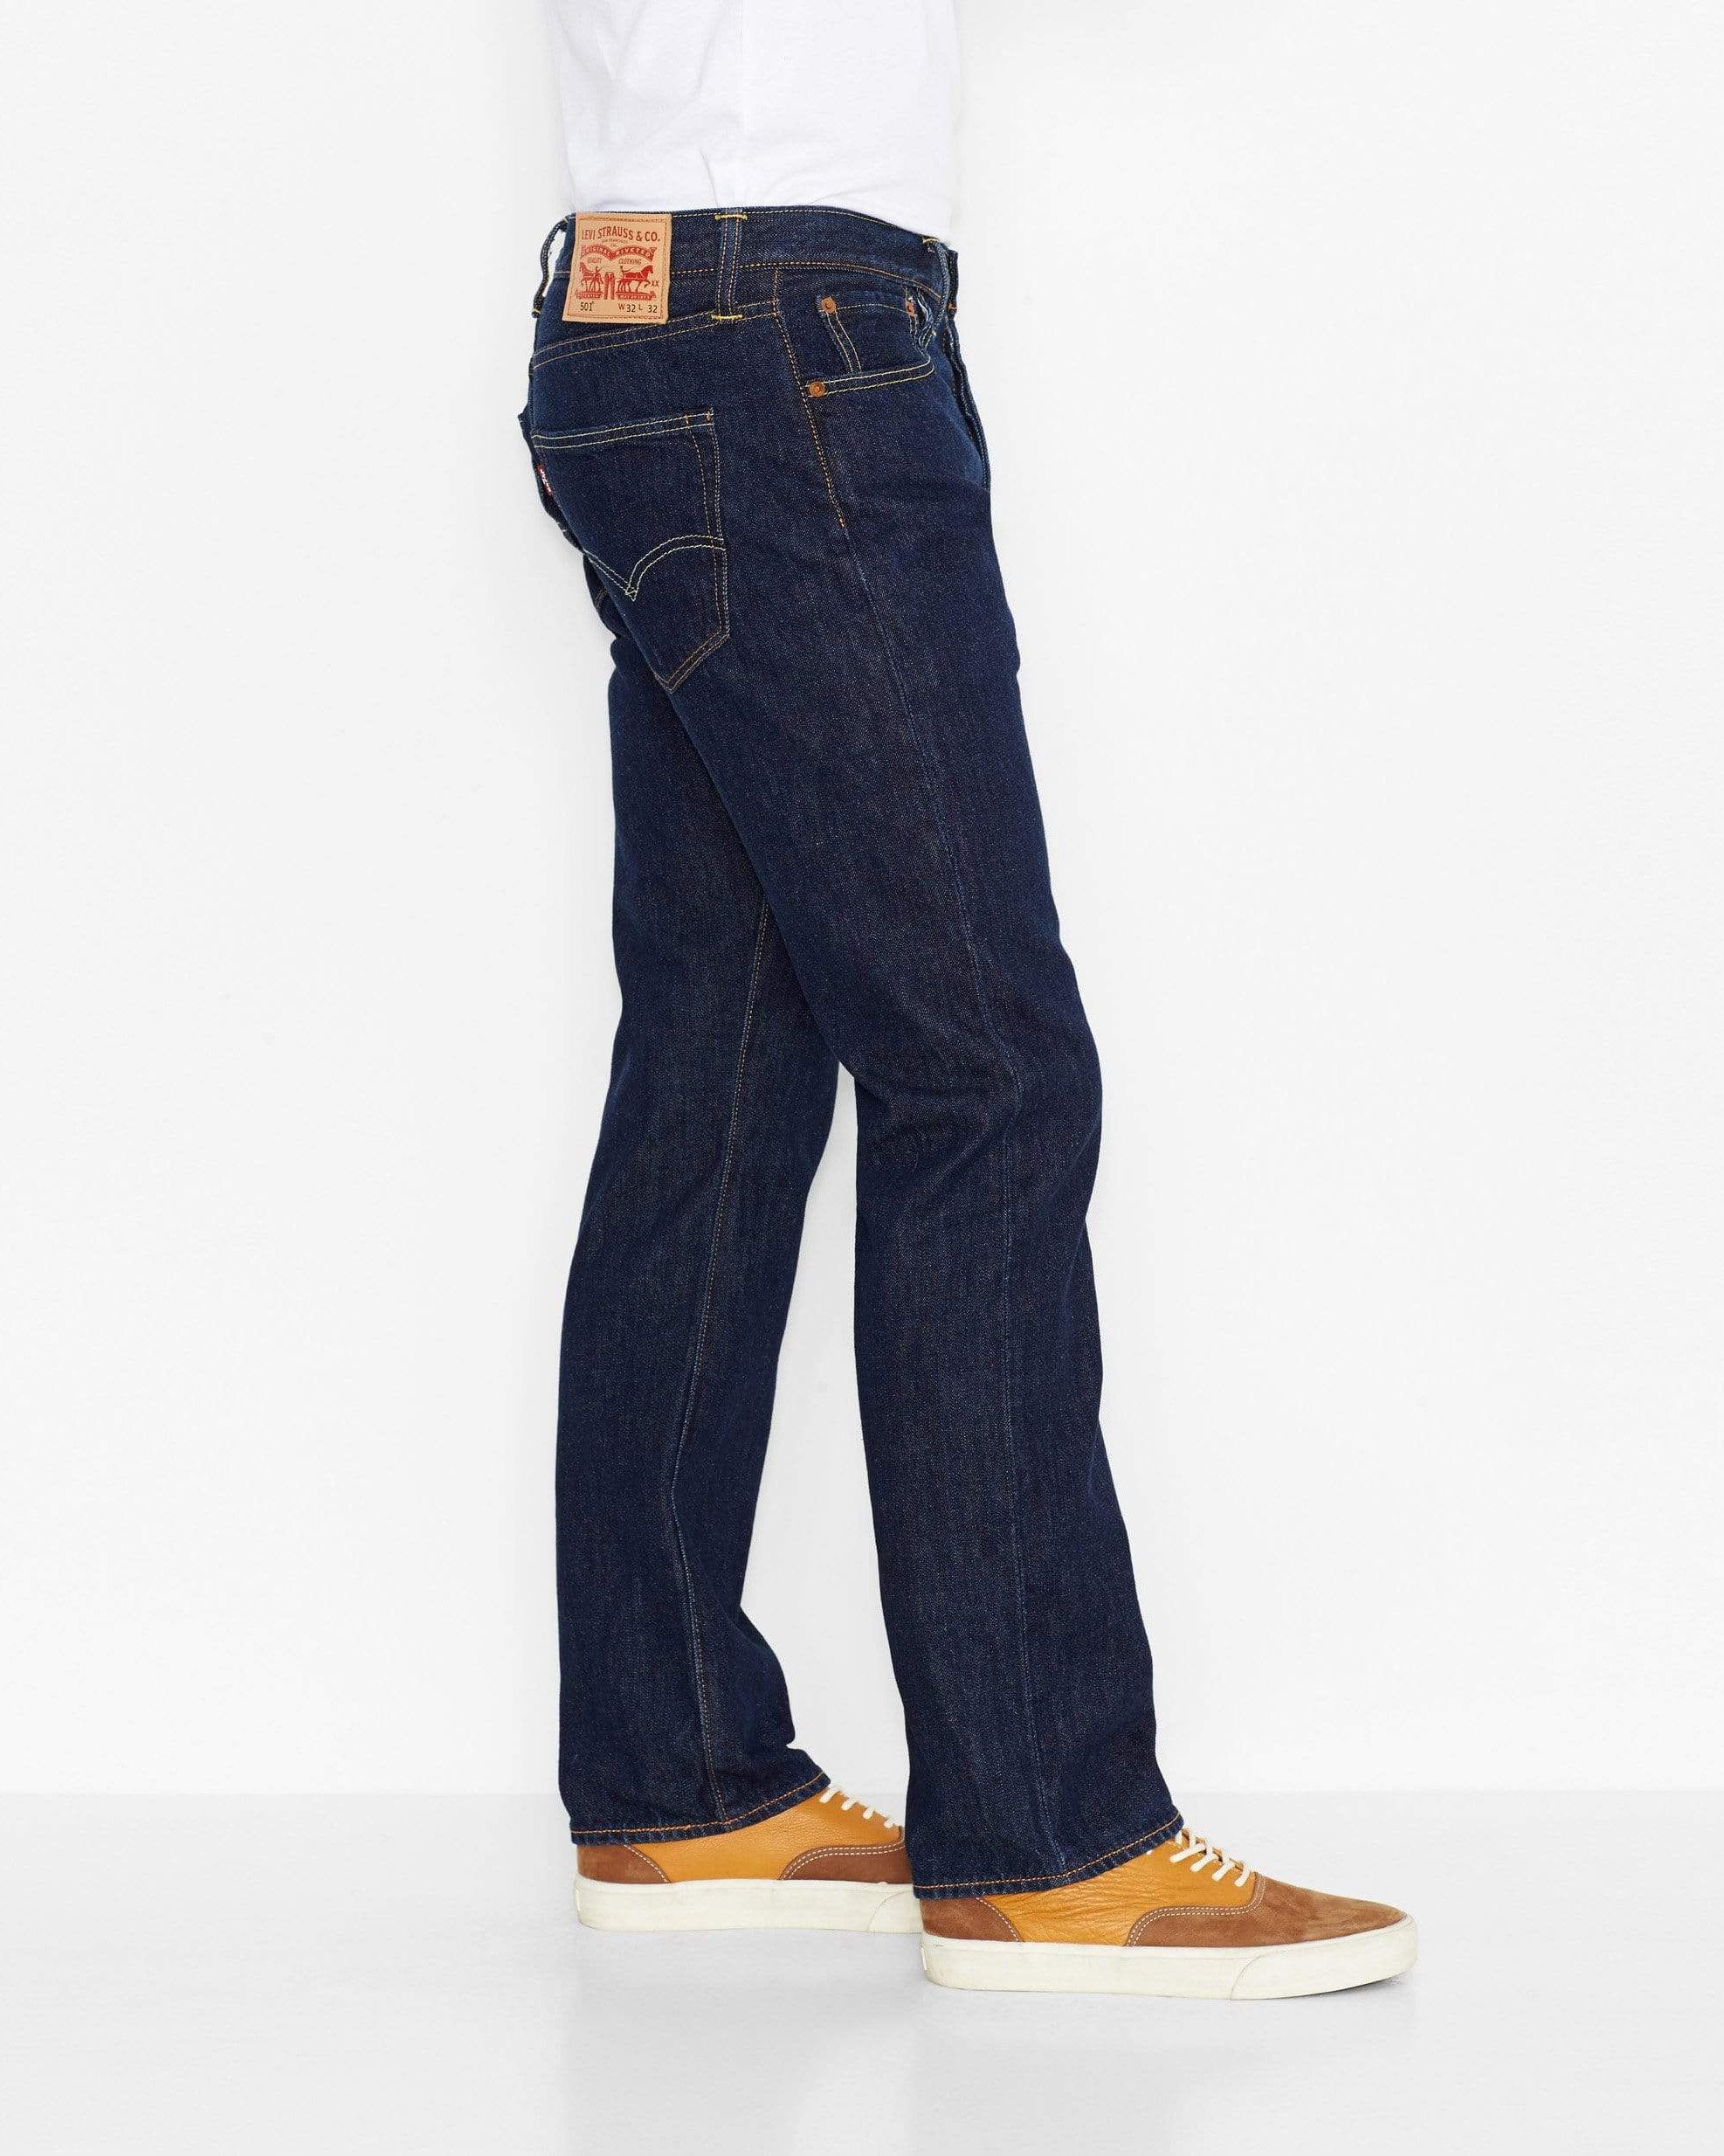 Levis 501 Original Regular Fit Mens Jeans - Blue - and Street Fashion from Jeanstore